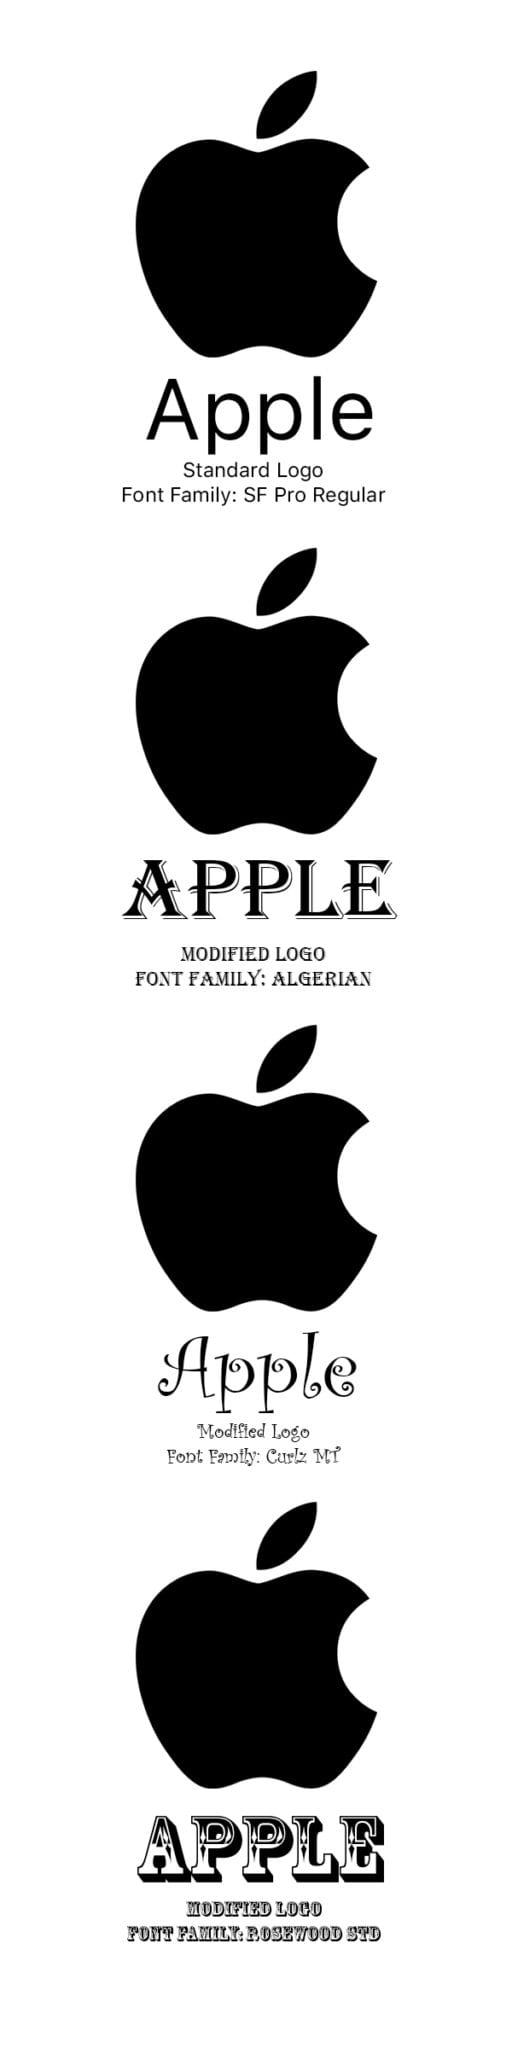 Apple's logo takes on a different nature when you change the font.